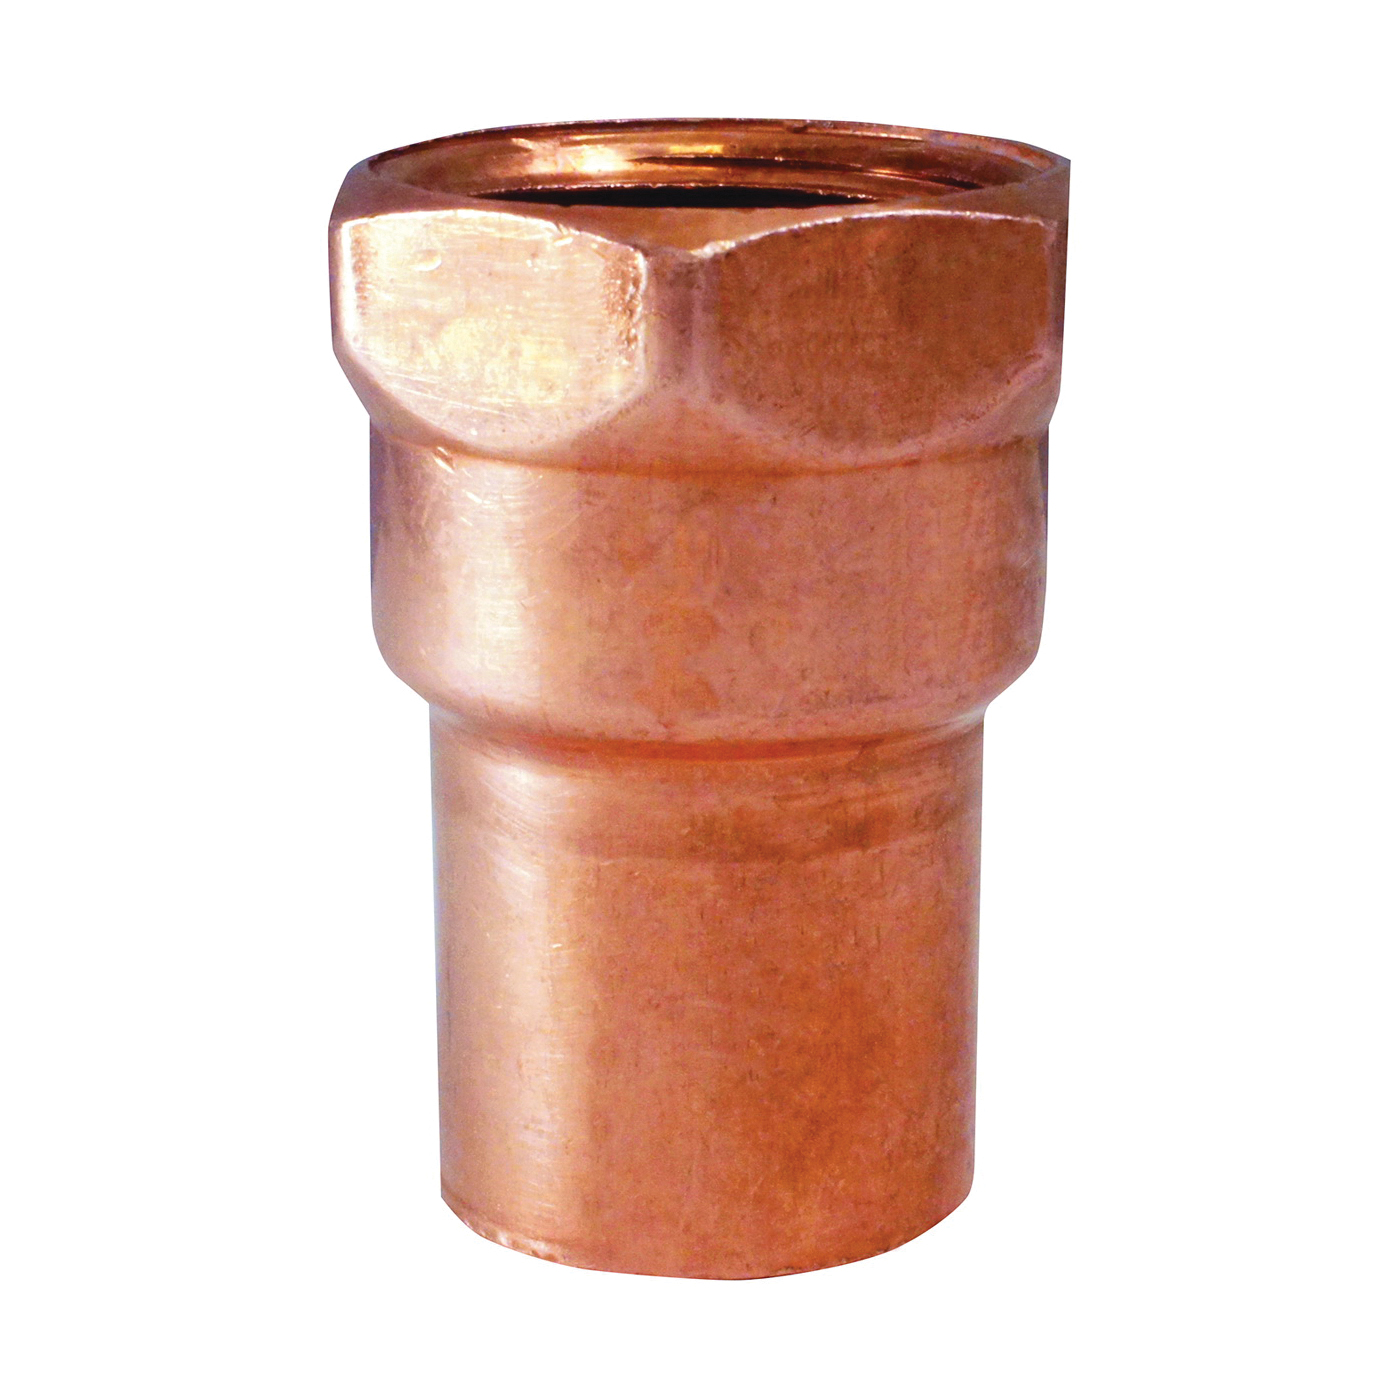 103 Series 30110 Pipe Adapter, 1/4 in, Sweat x FNPT, Copper